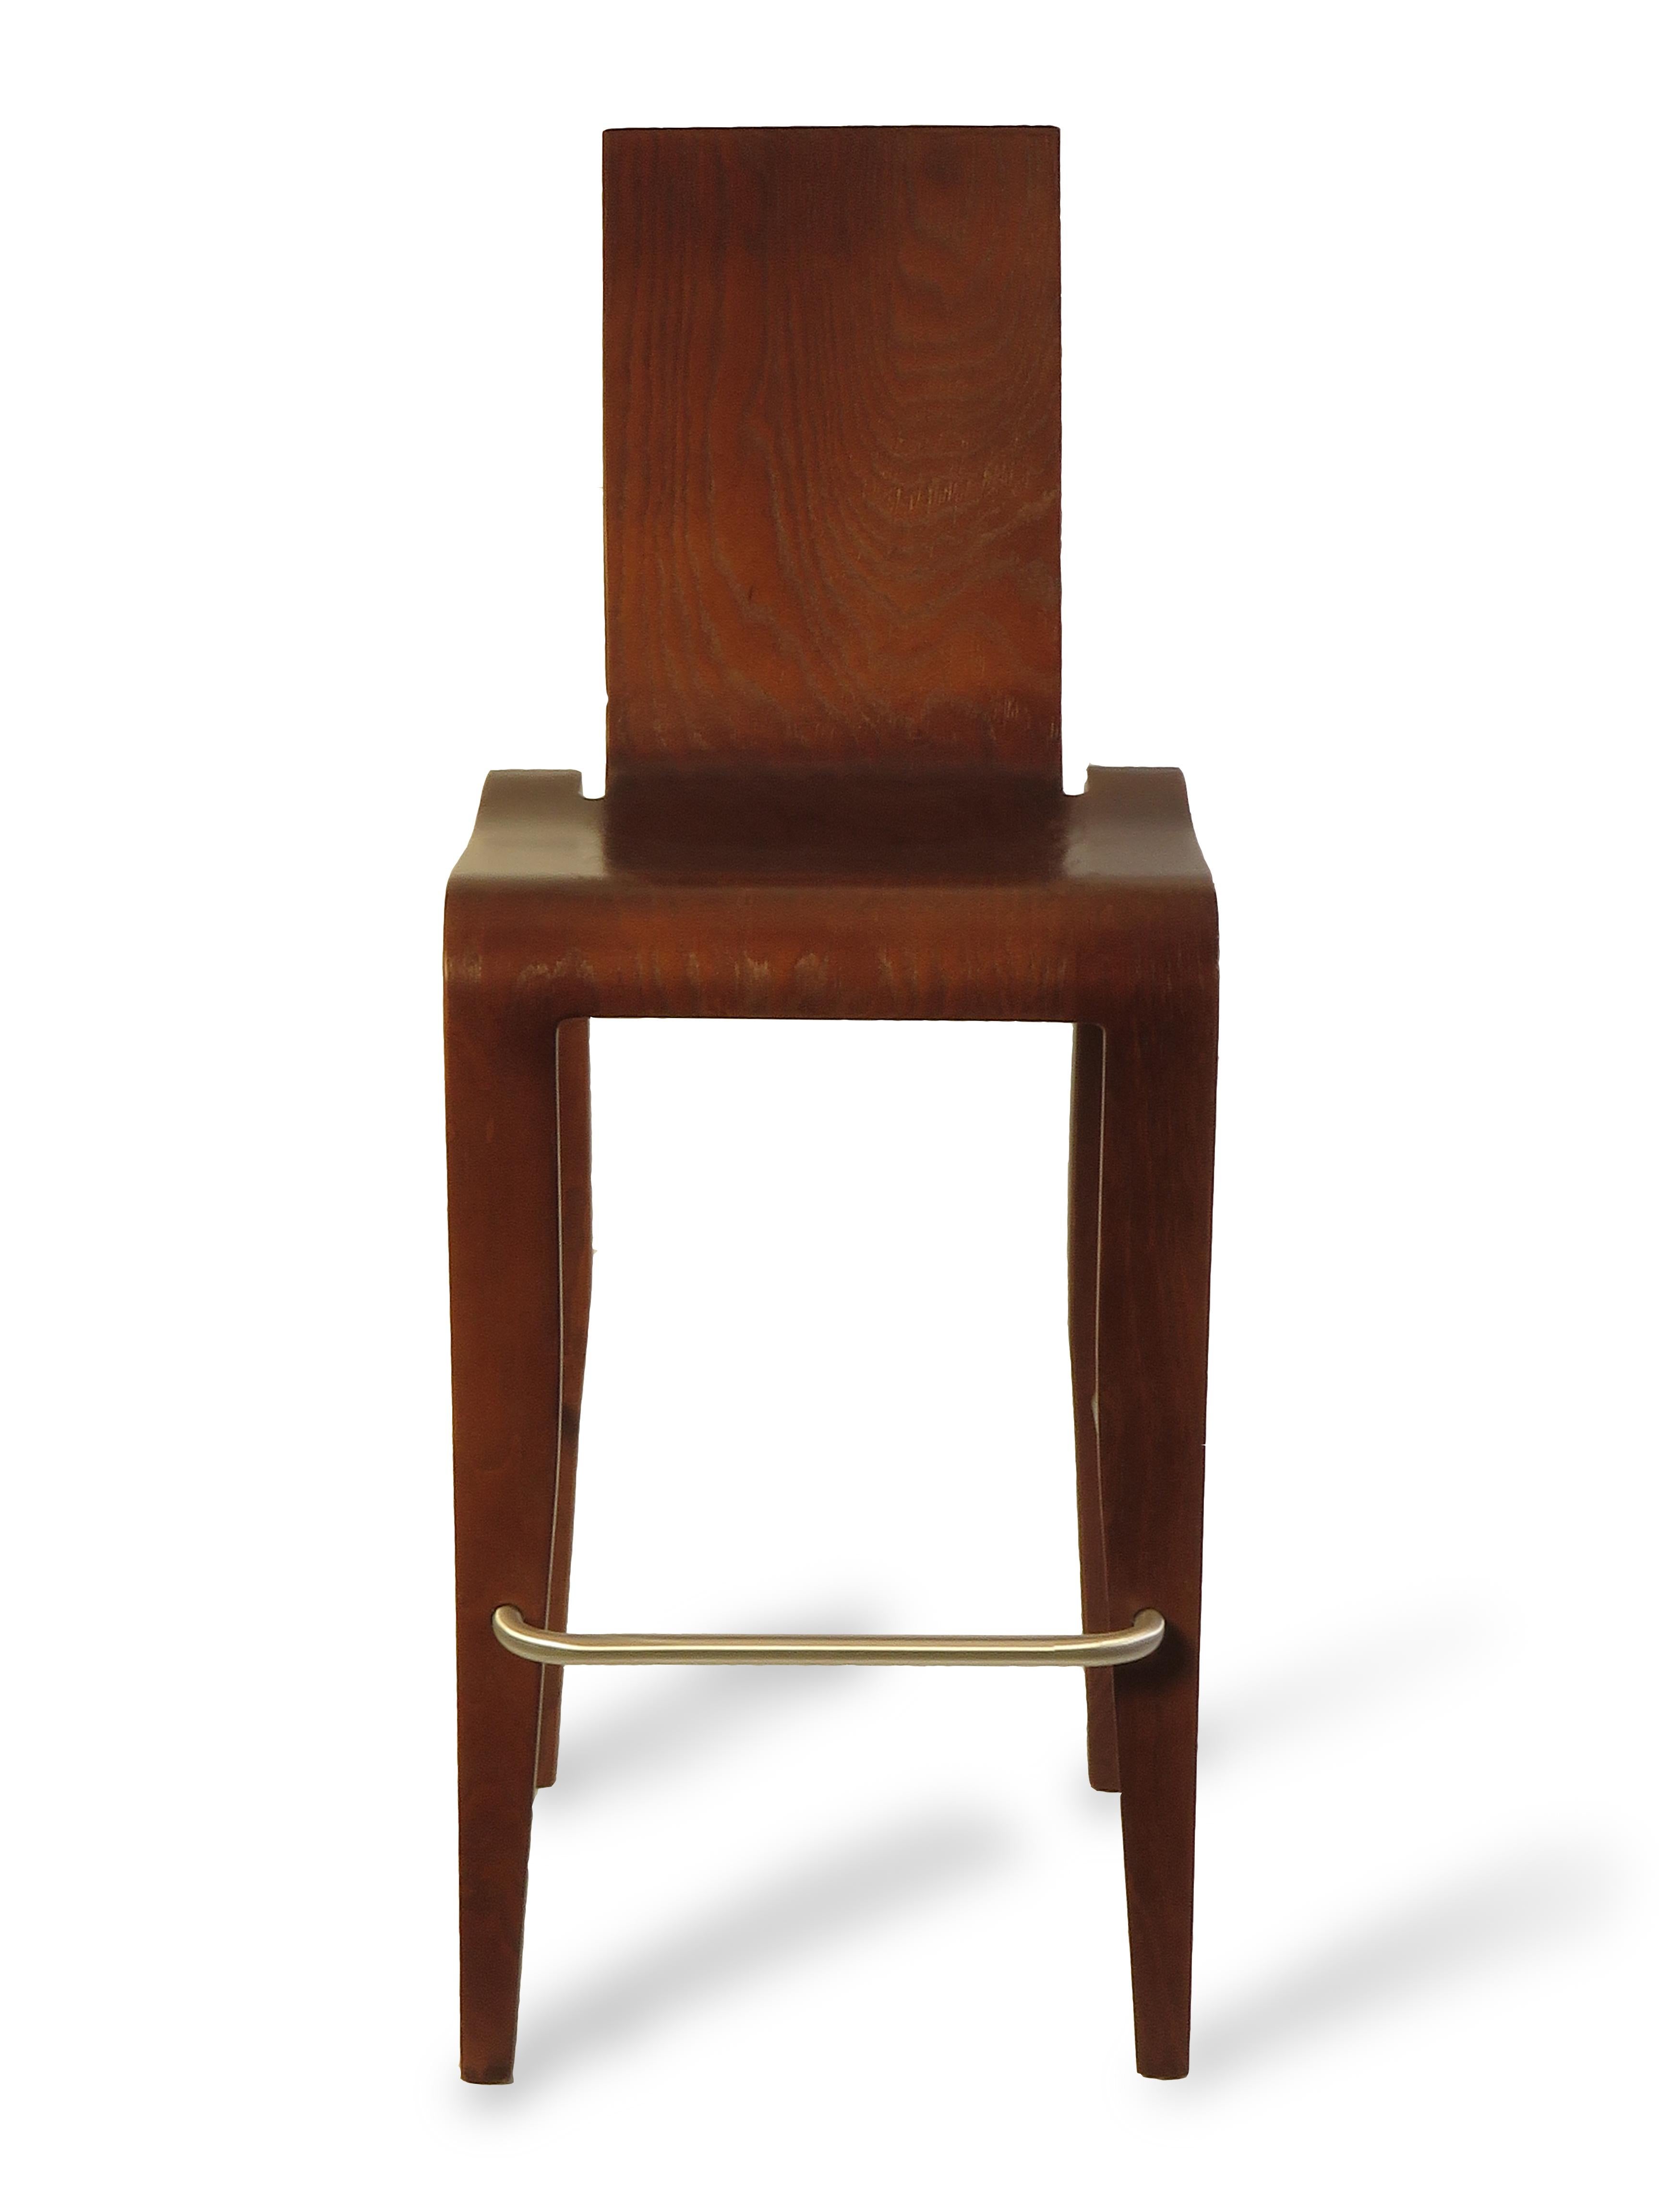 American Maple Plybent Bar Chair in Walnut, Set of 4 Vintage Peter Danko For Sale